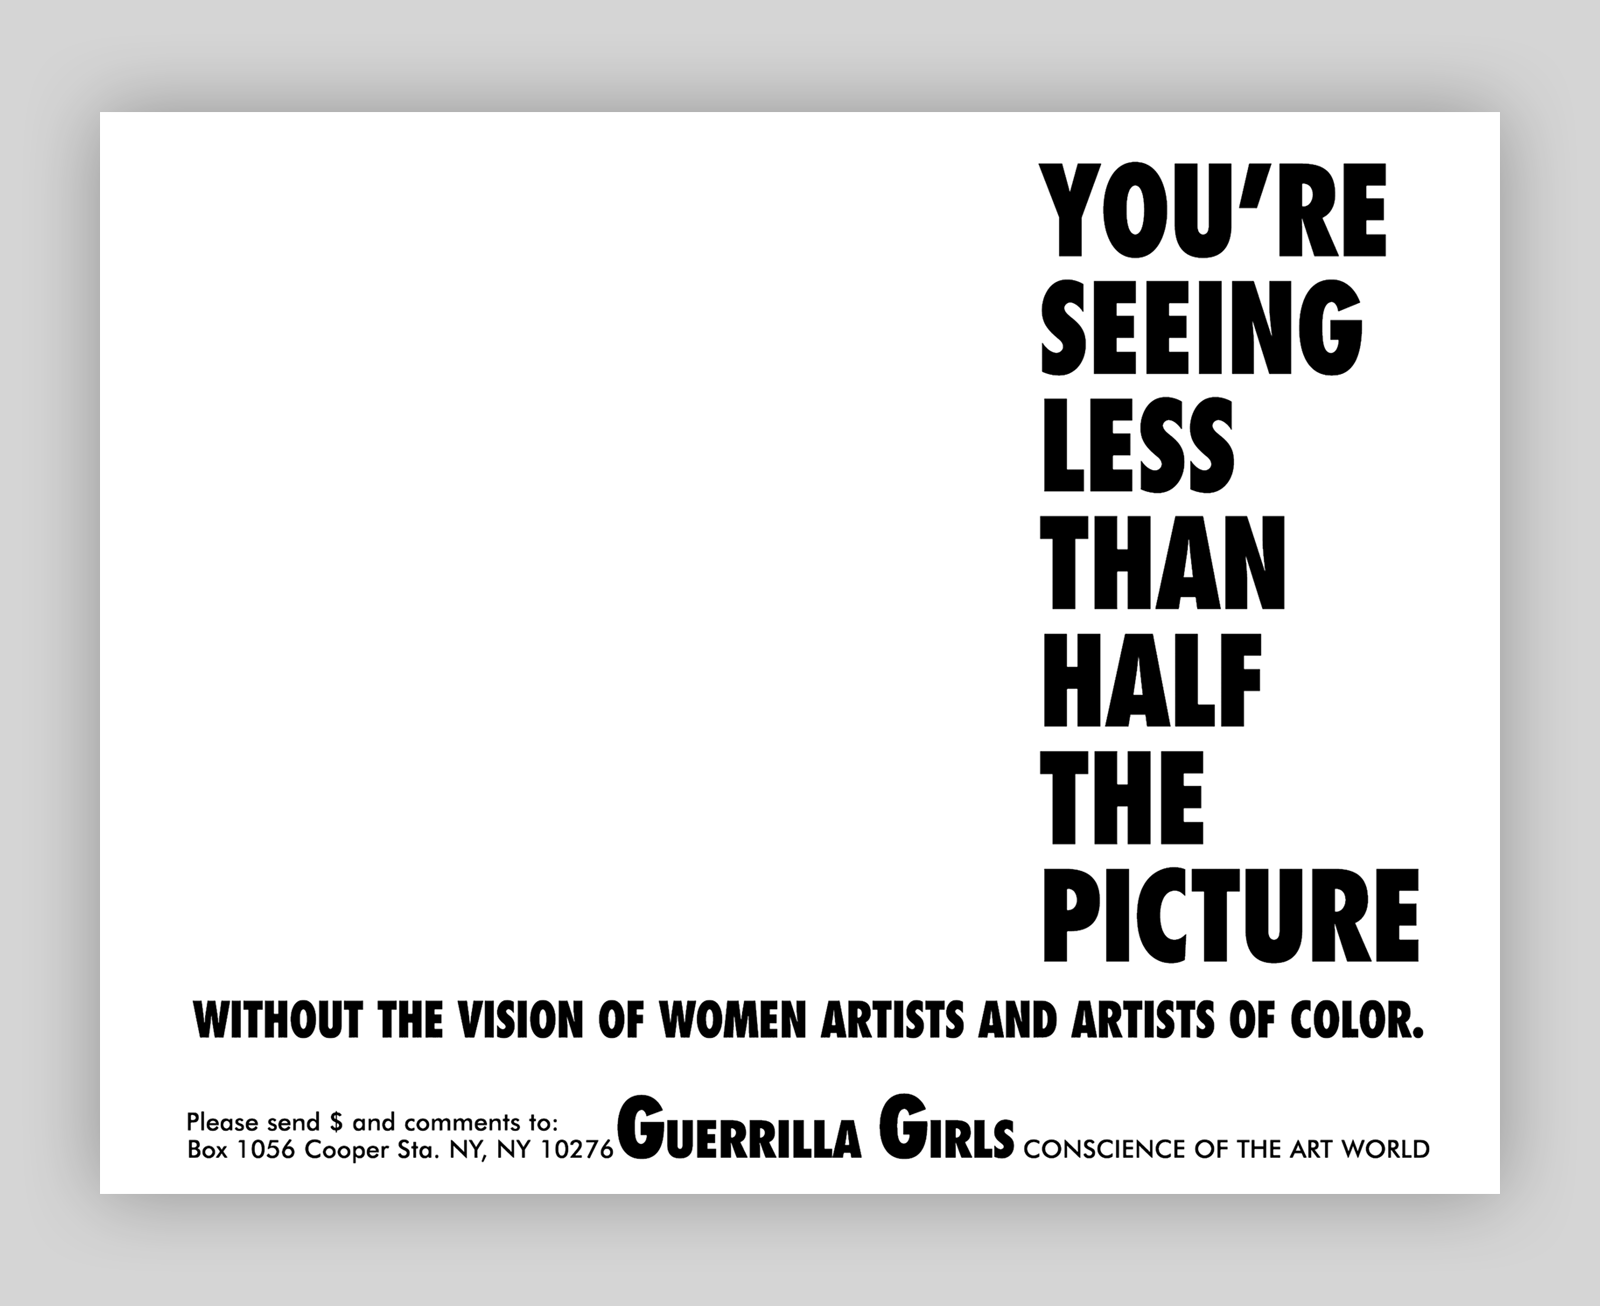 Guerrilla Girls, You're Seeing Less than Half the Picture, 1989.